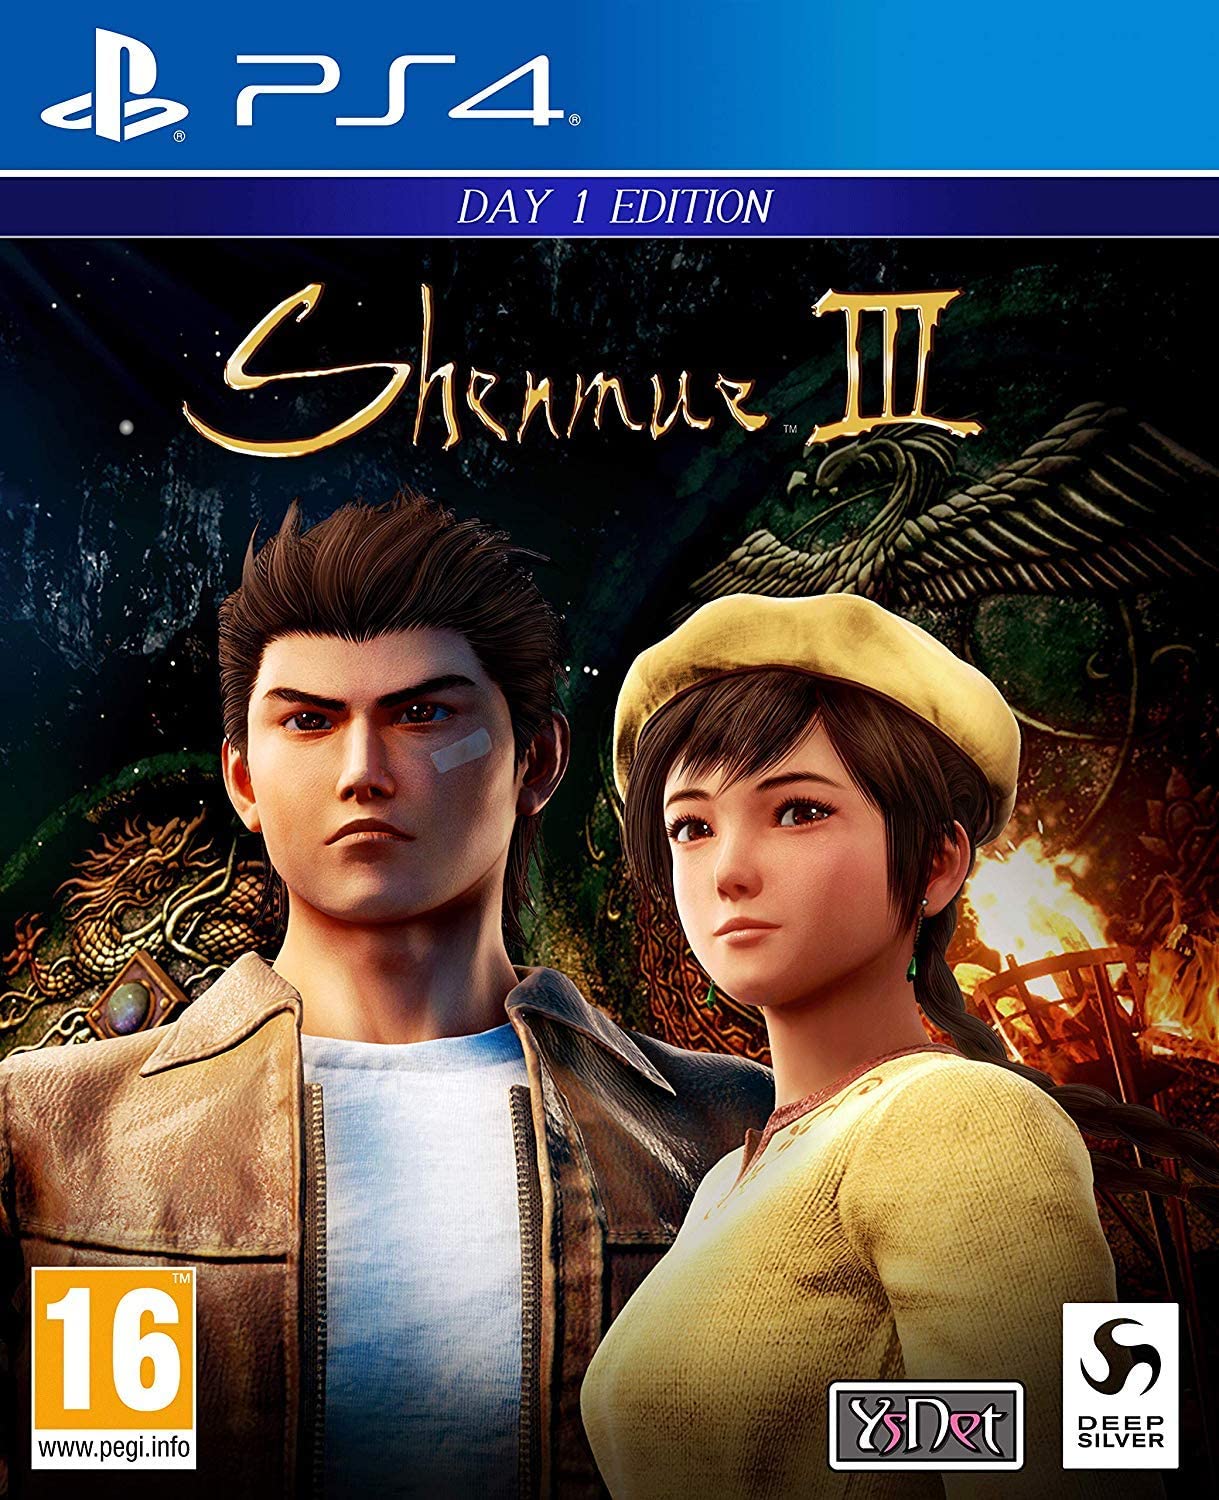 SHENMUE 3 DAY 1 EDITION PS4 GAME BRAND NEW - saynama